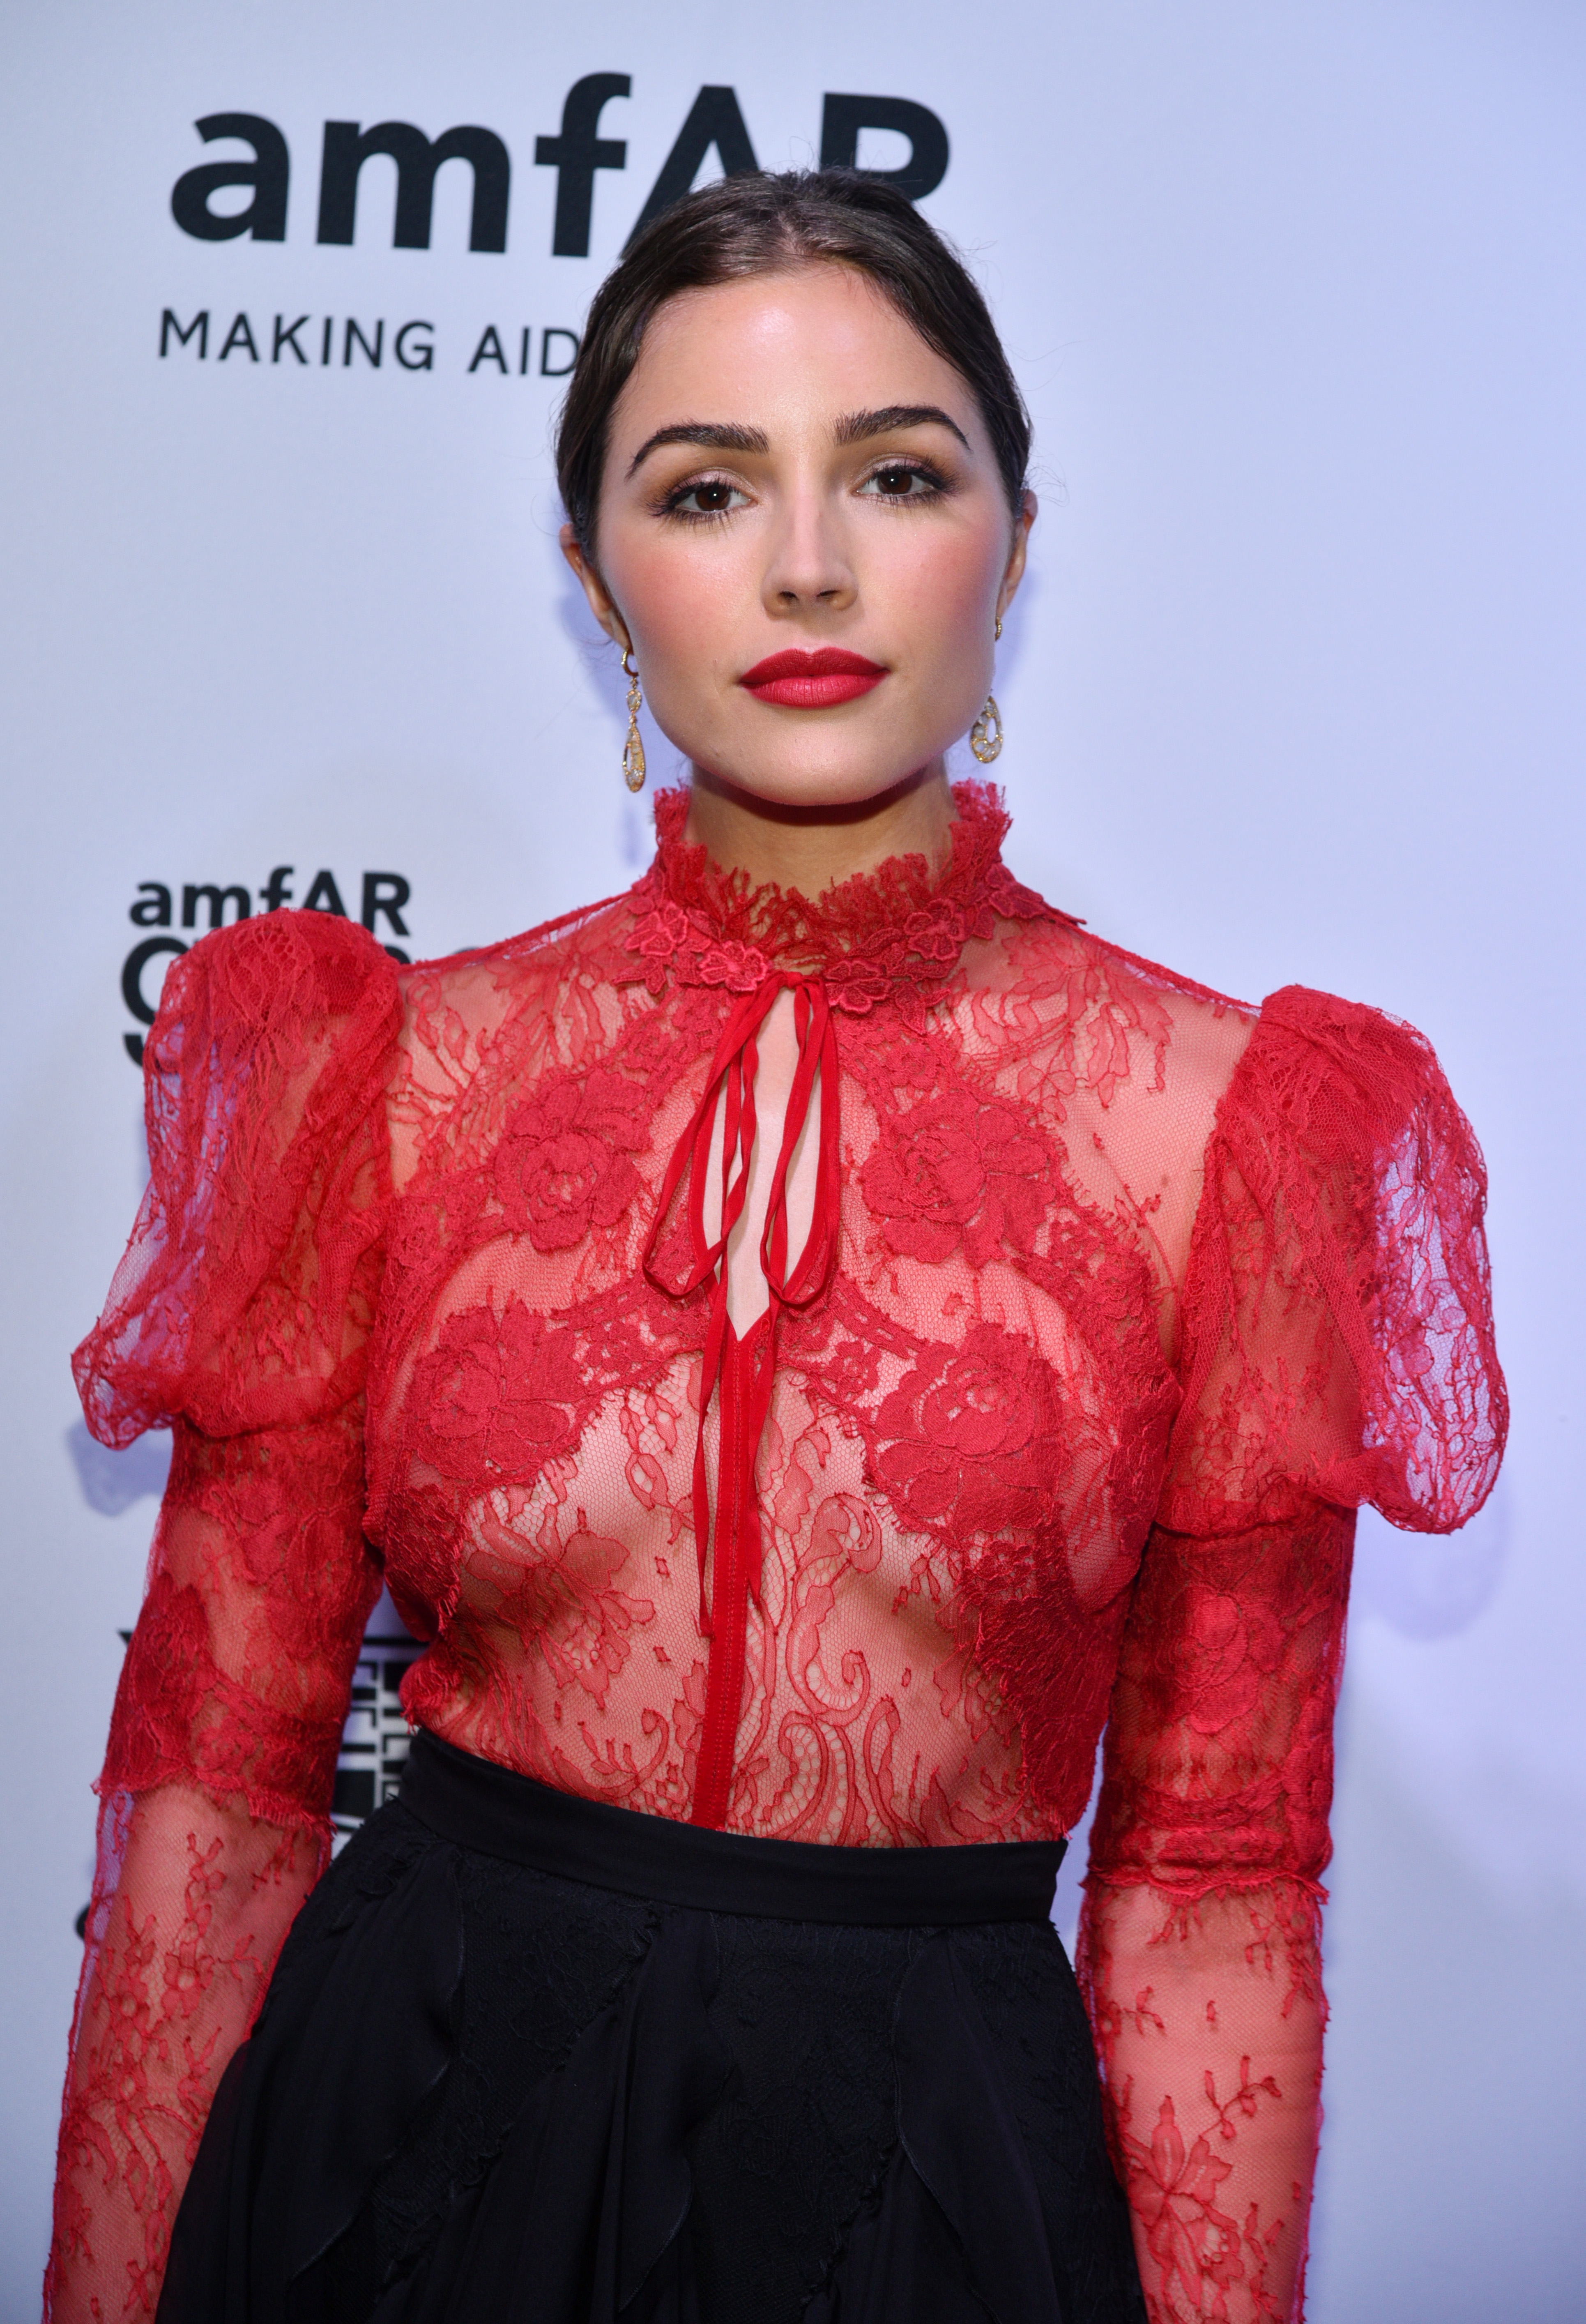 The former Miss Universe really likes see-through red tops, as she wore this sheer lace one with carefully placed appliques to an amfAR event in 2017.